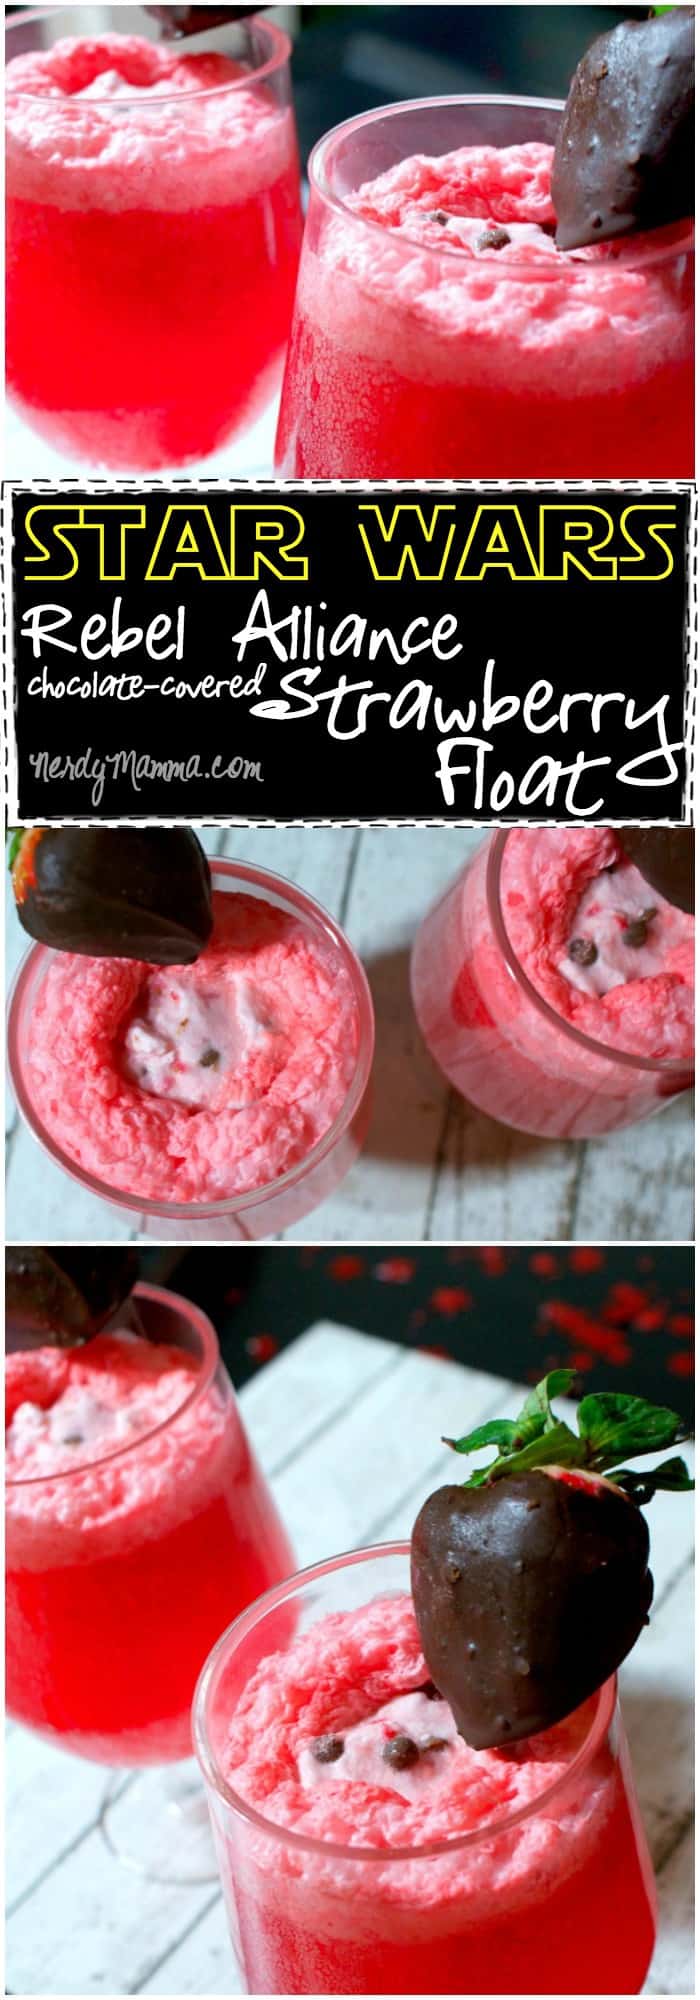 This Star Wars Rebel Alliance Chocolate-Covered Strawberry Float is like the YUMMIEST drink for a Star Wars party. No really. Like the best. So yummy, you won't want to share with the kids. LOL!